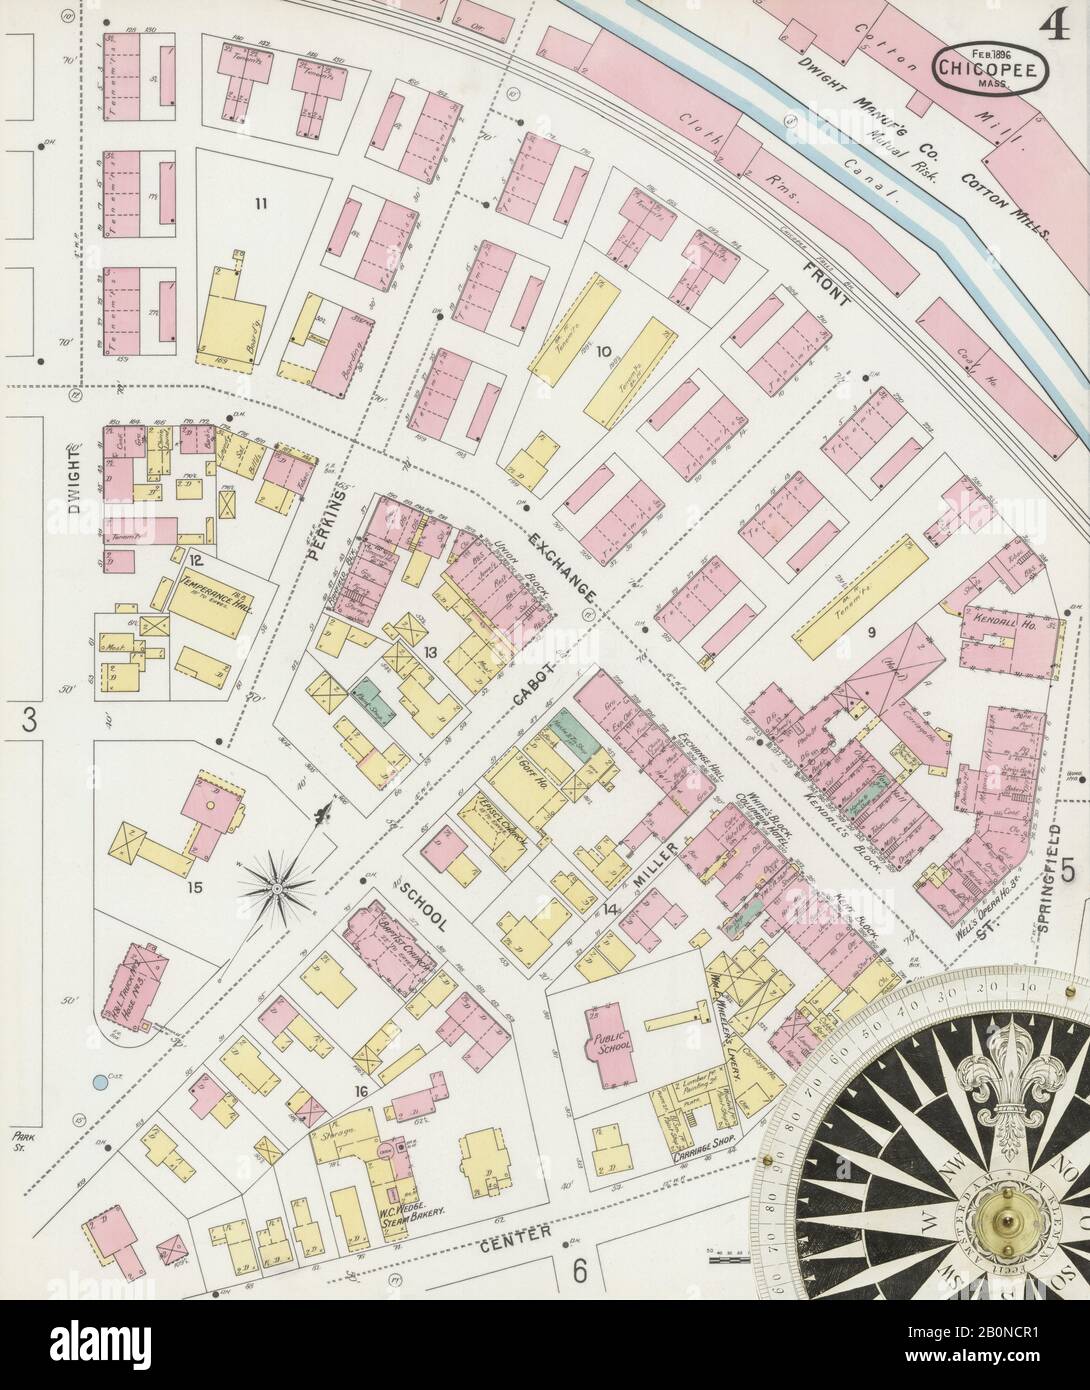 Image 4 of Sanborn Fire Insurance Map from Chicopee, Hampden County, Massachusetts. Feb 1896. 16 Sheet(s). Includes Chicopee Falls, America, street map with a Nineteenth Century compass Stock Photo